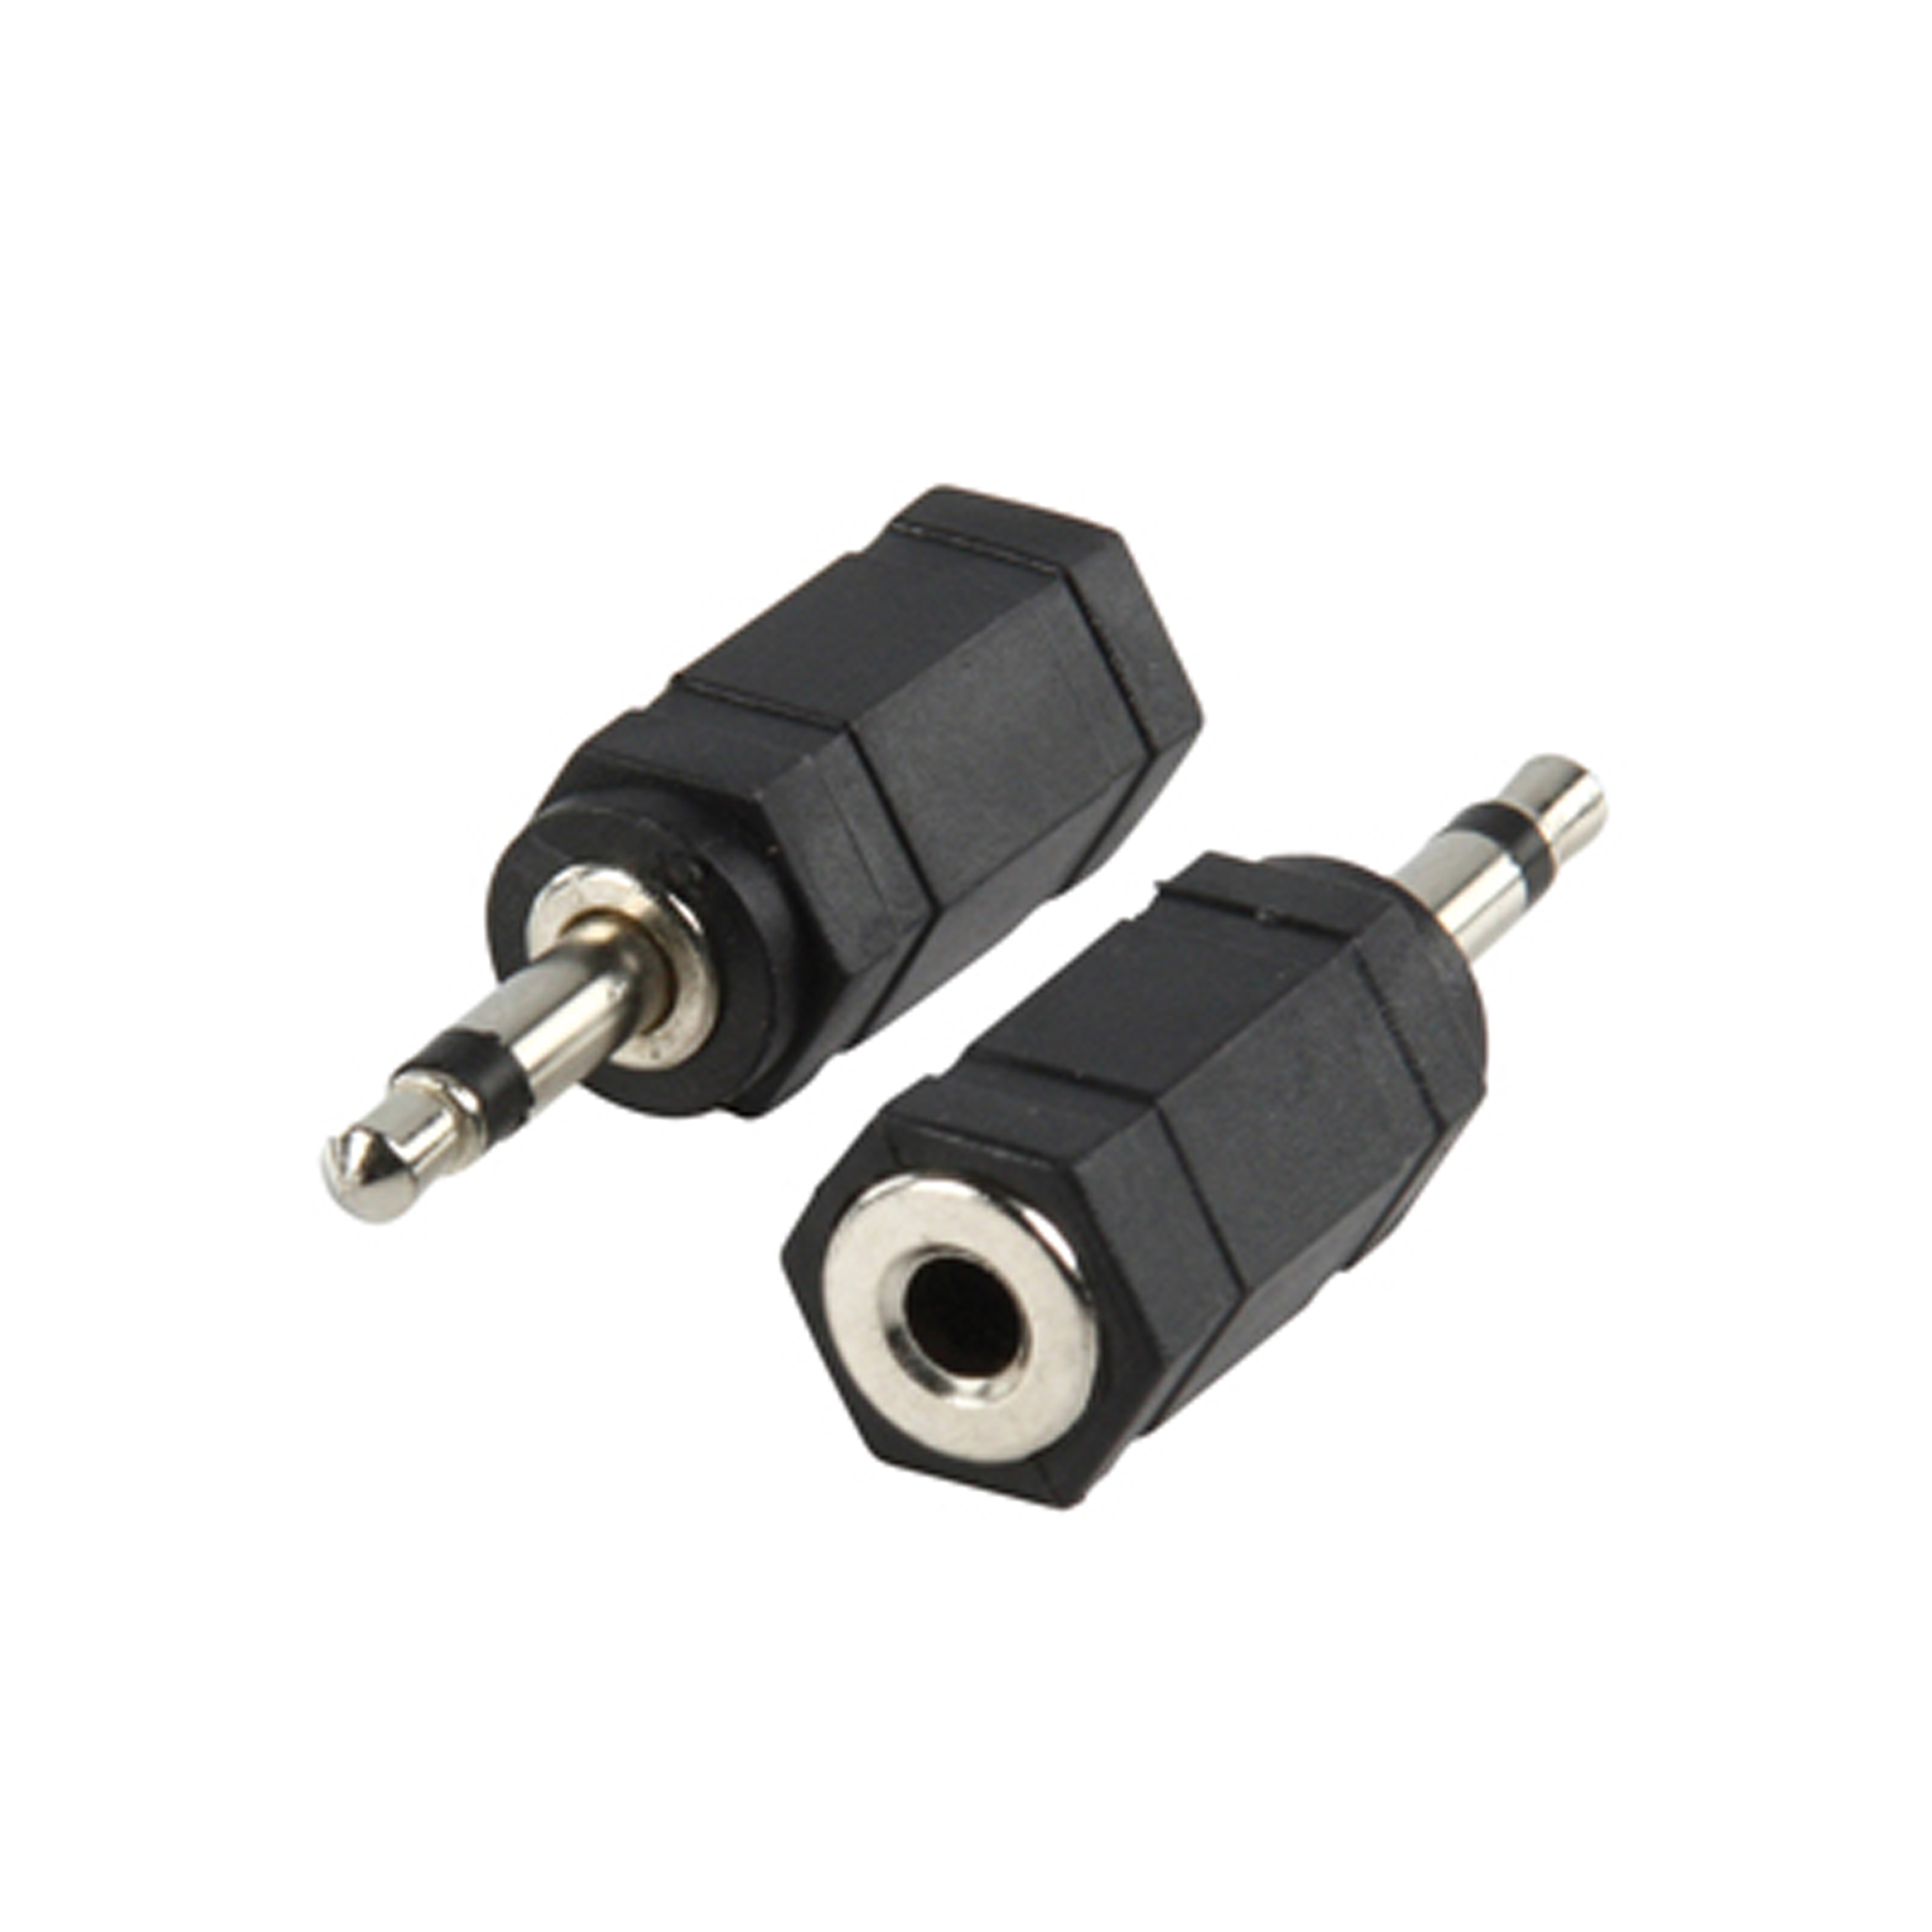 A-3525FM1: 3.5mm stereo female 2.5mm stereo male adapter